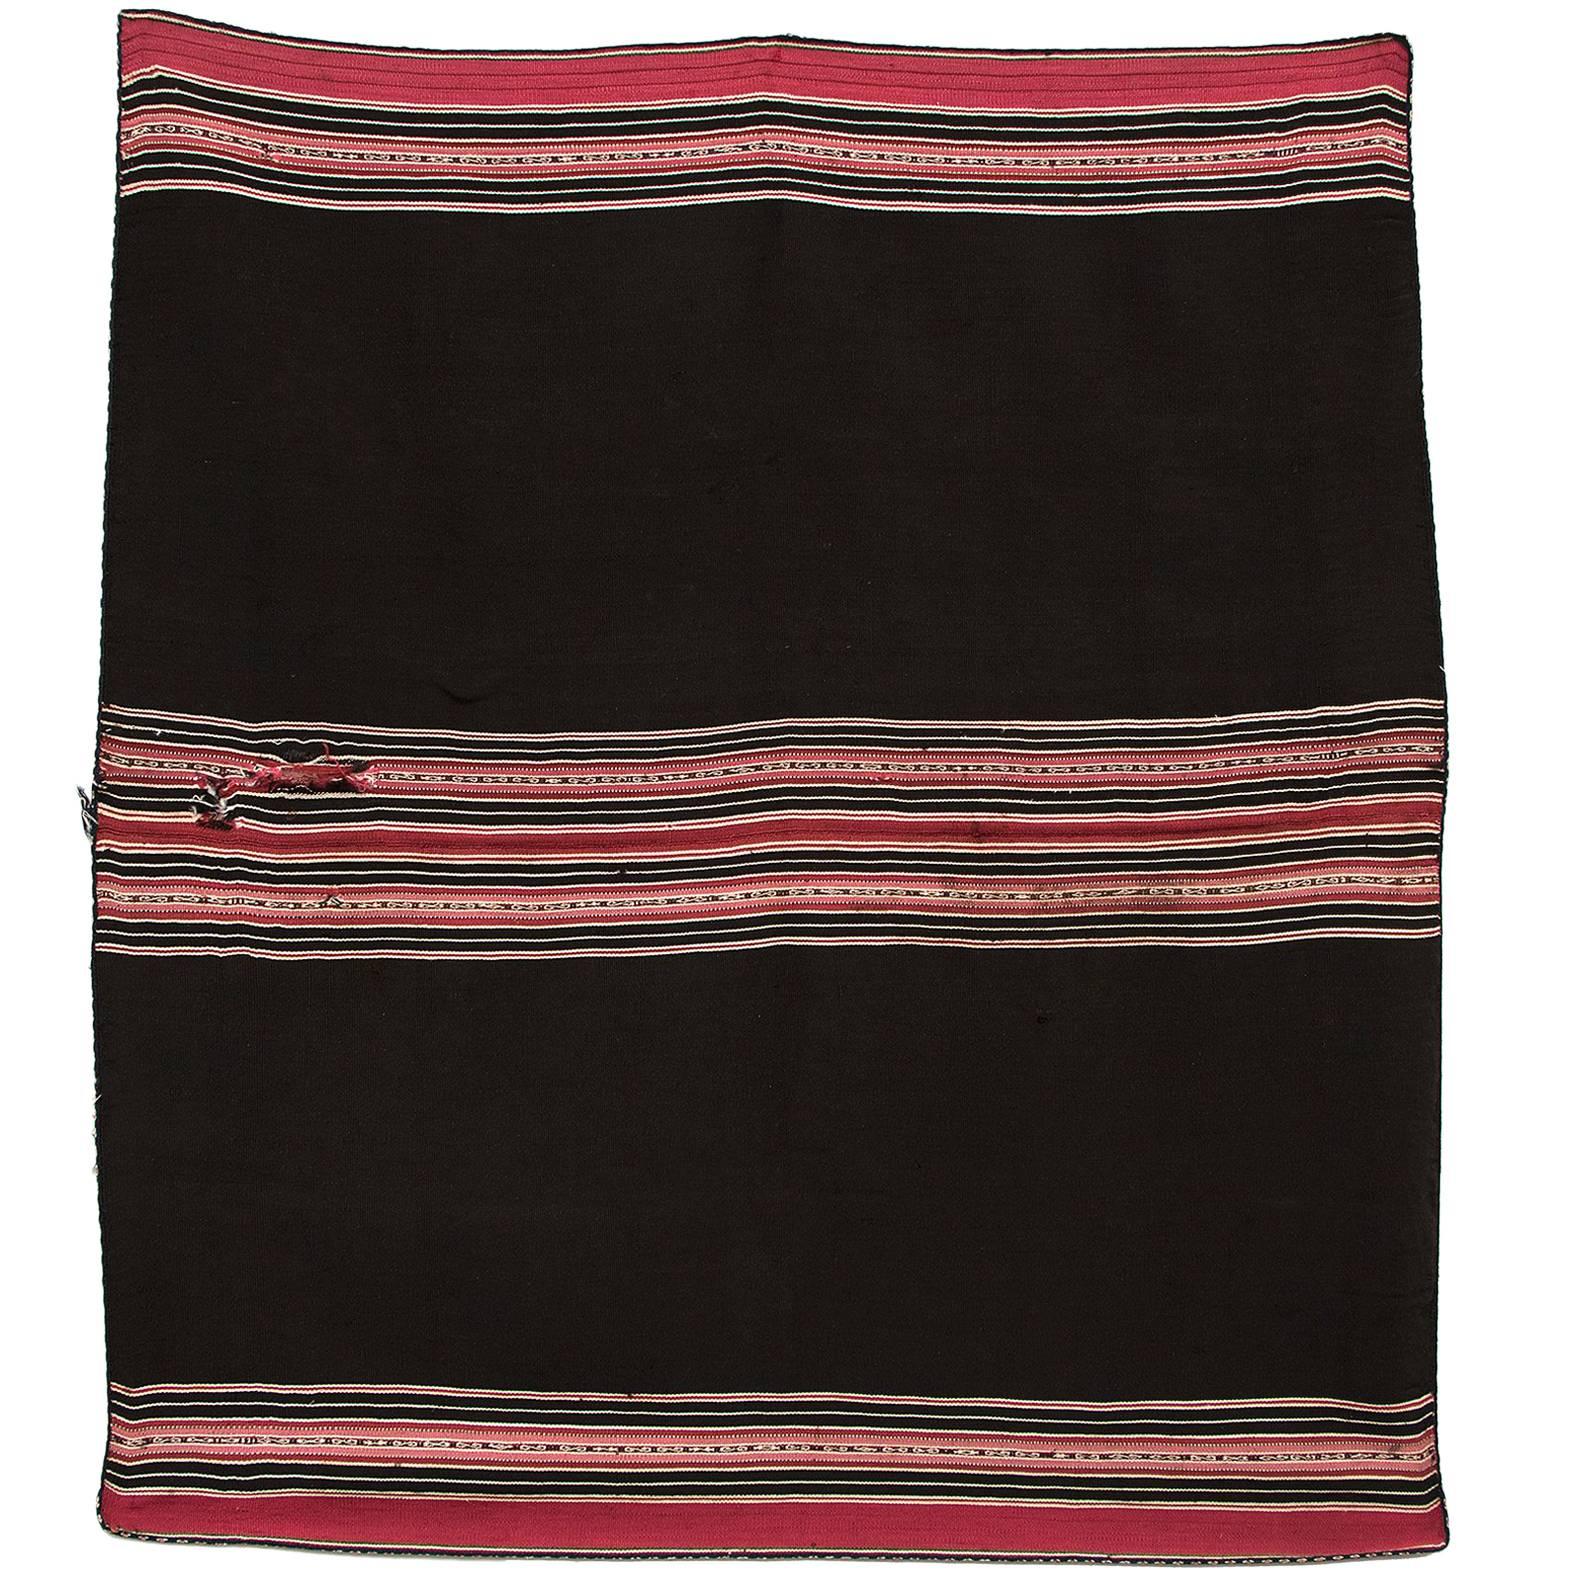 Bolivian Aymara Aguayo Textile Woven of Camelid Wool, Mid-19th Century